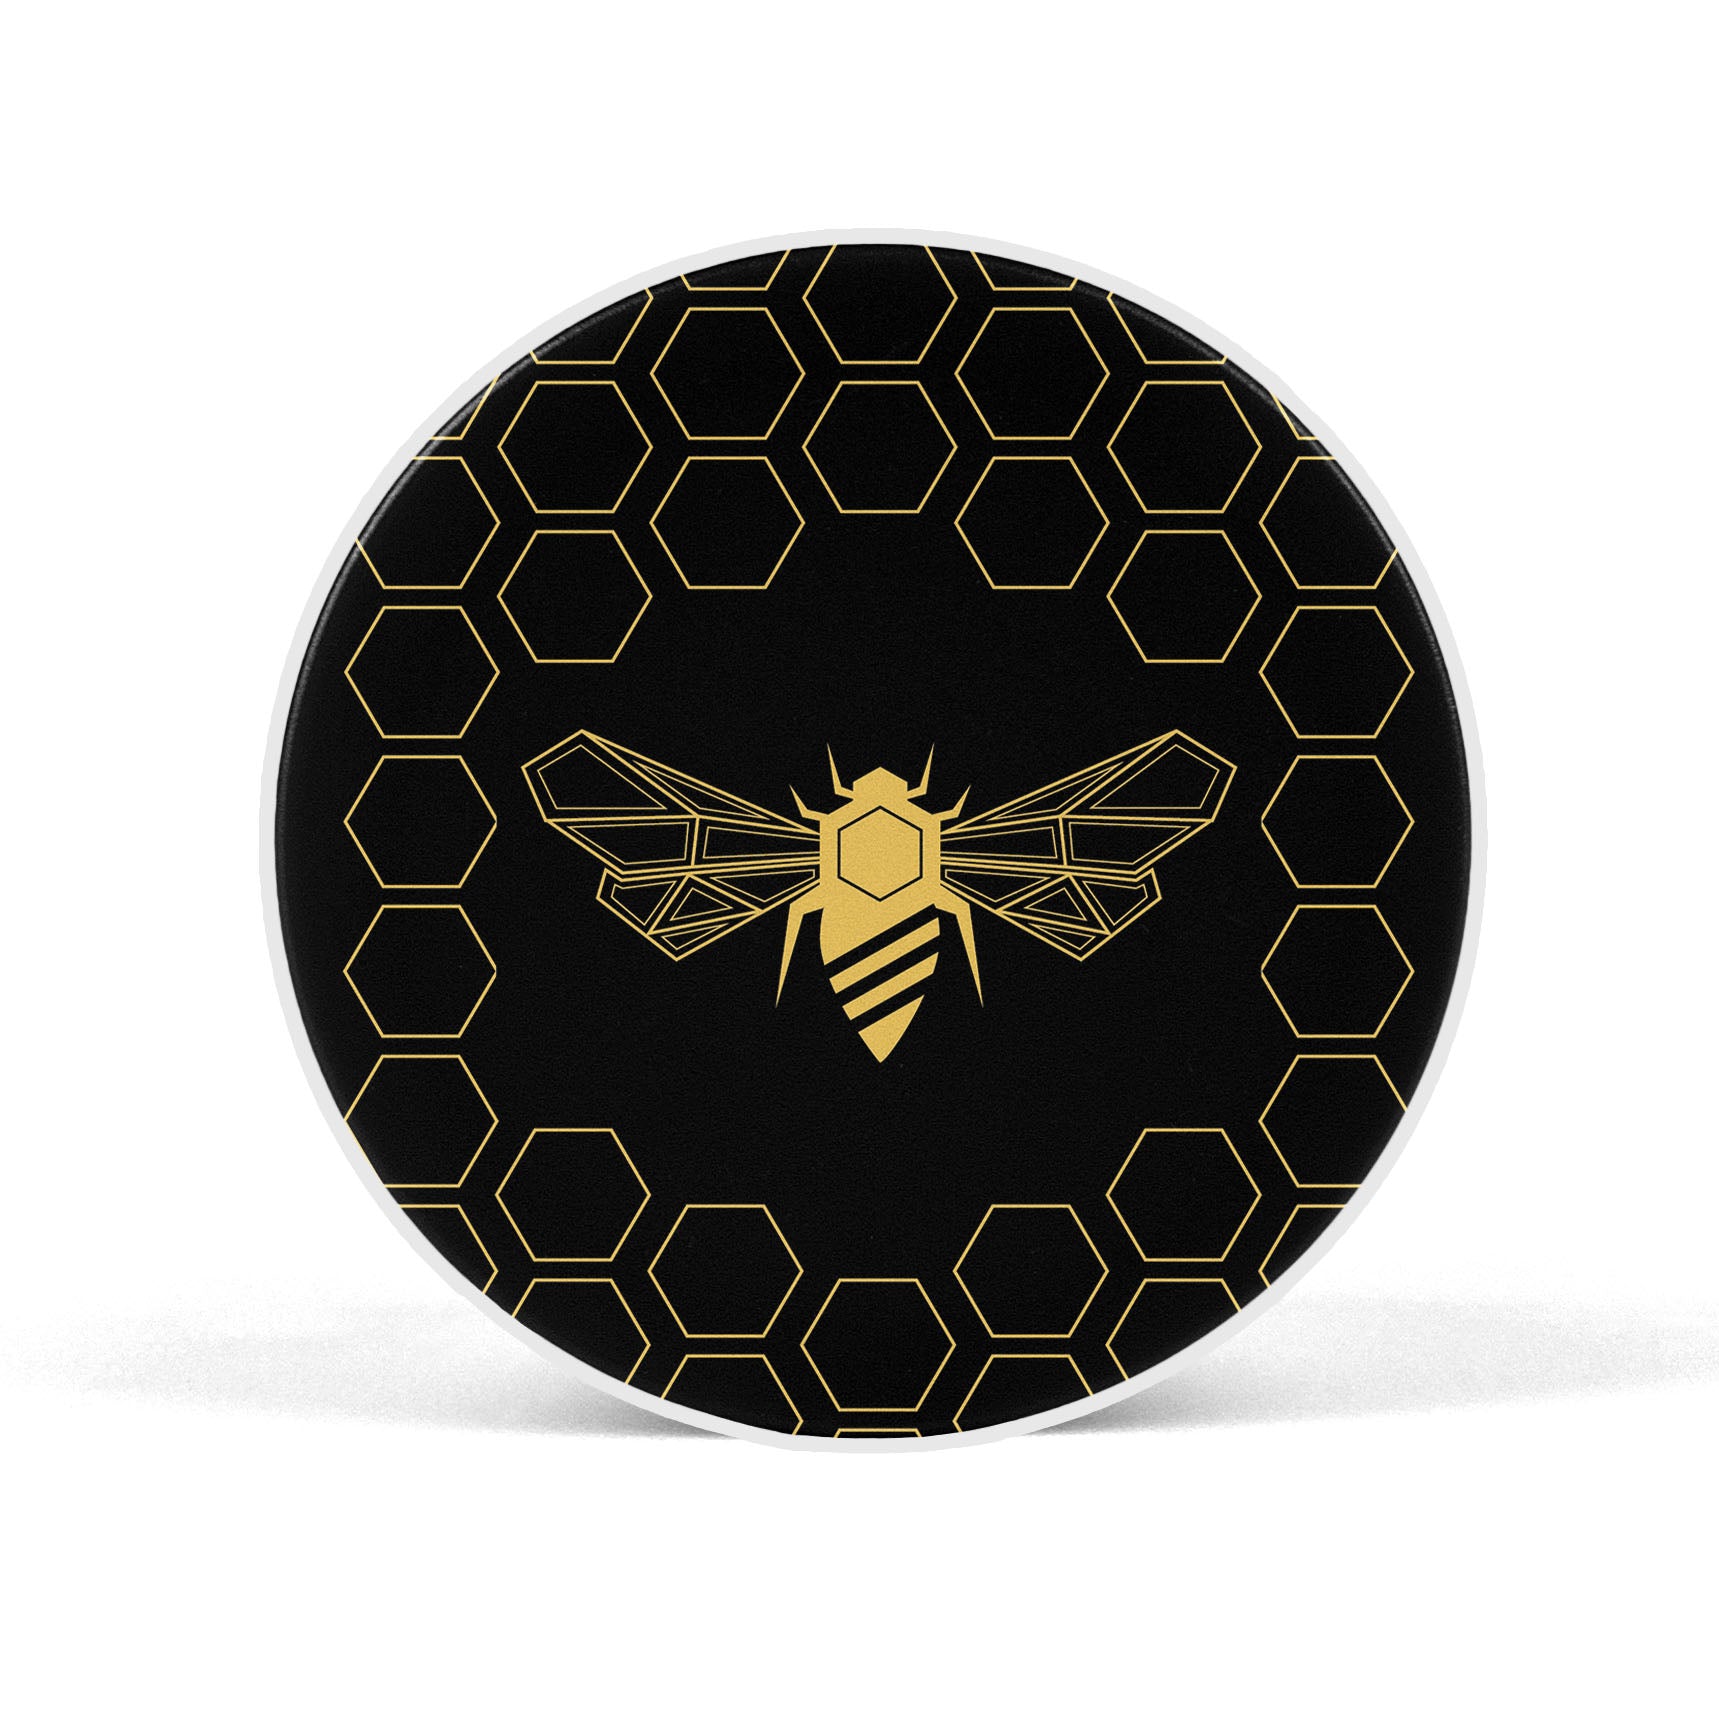 Bumble Bee Honeycomb Mobile Phone Holder Grip - SCOTTSY